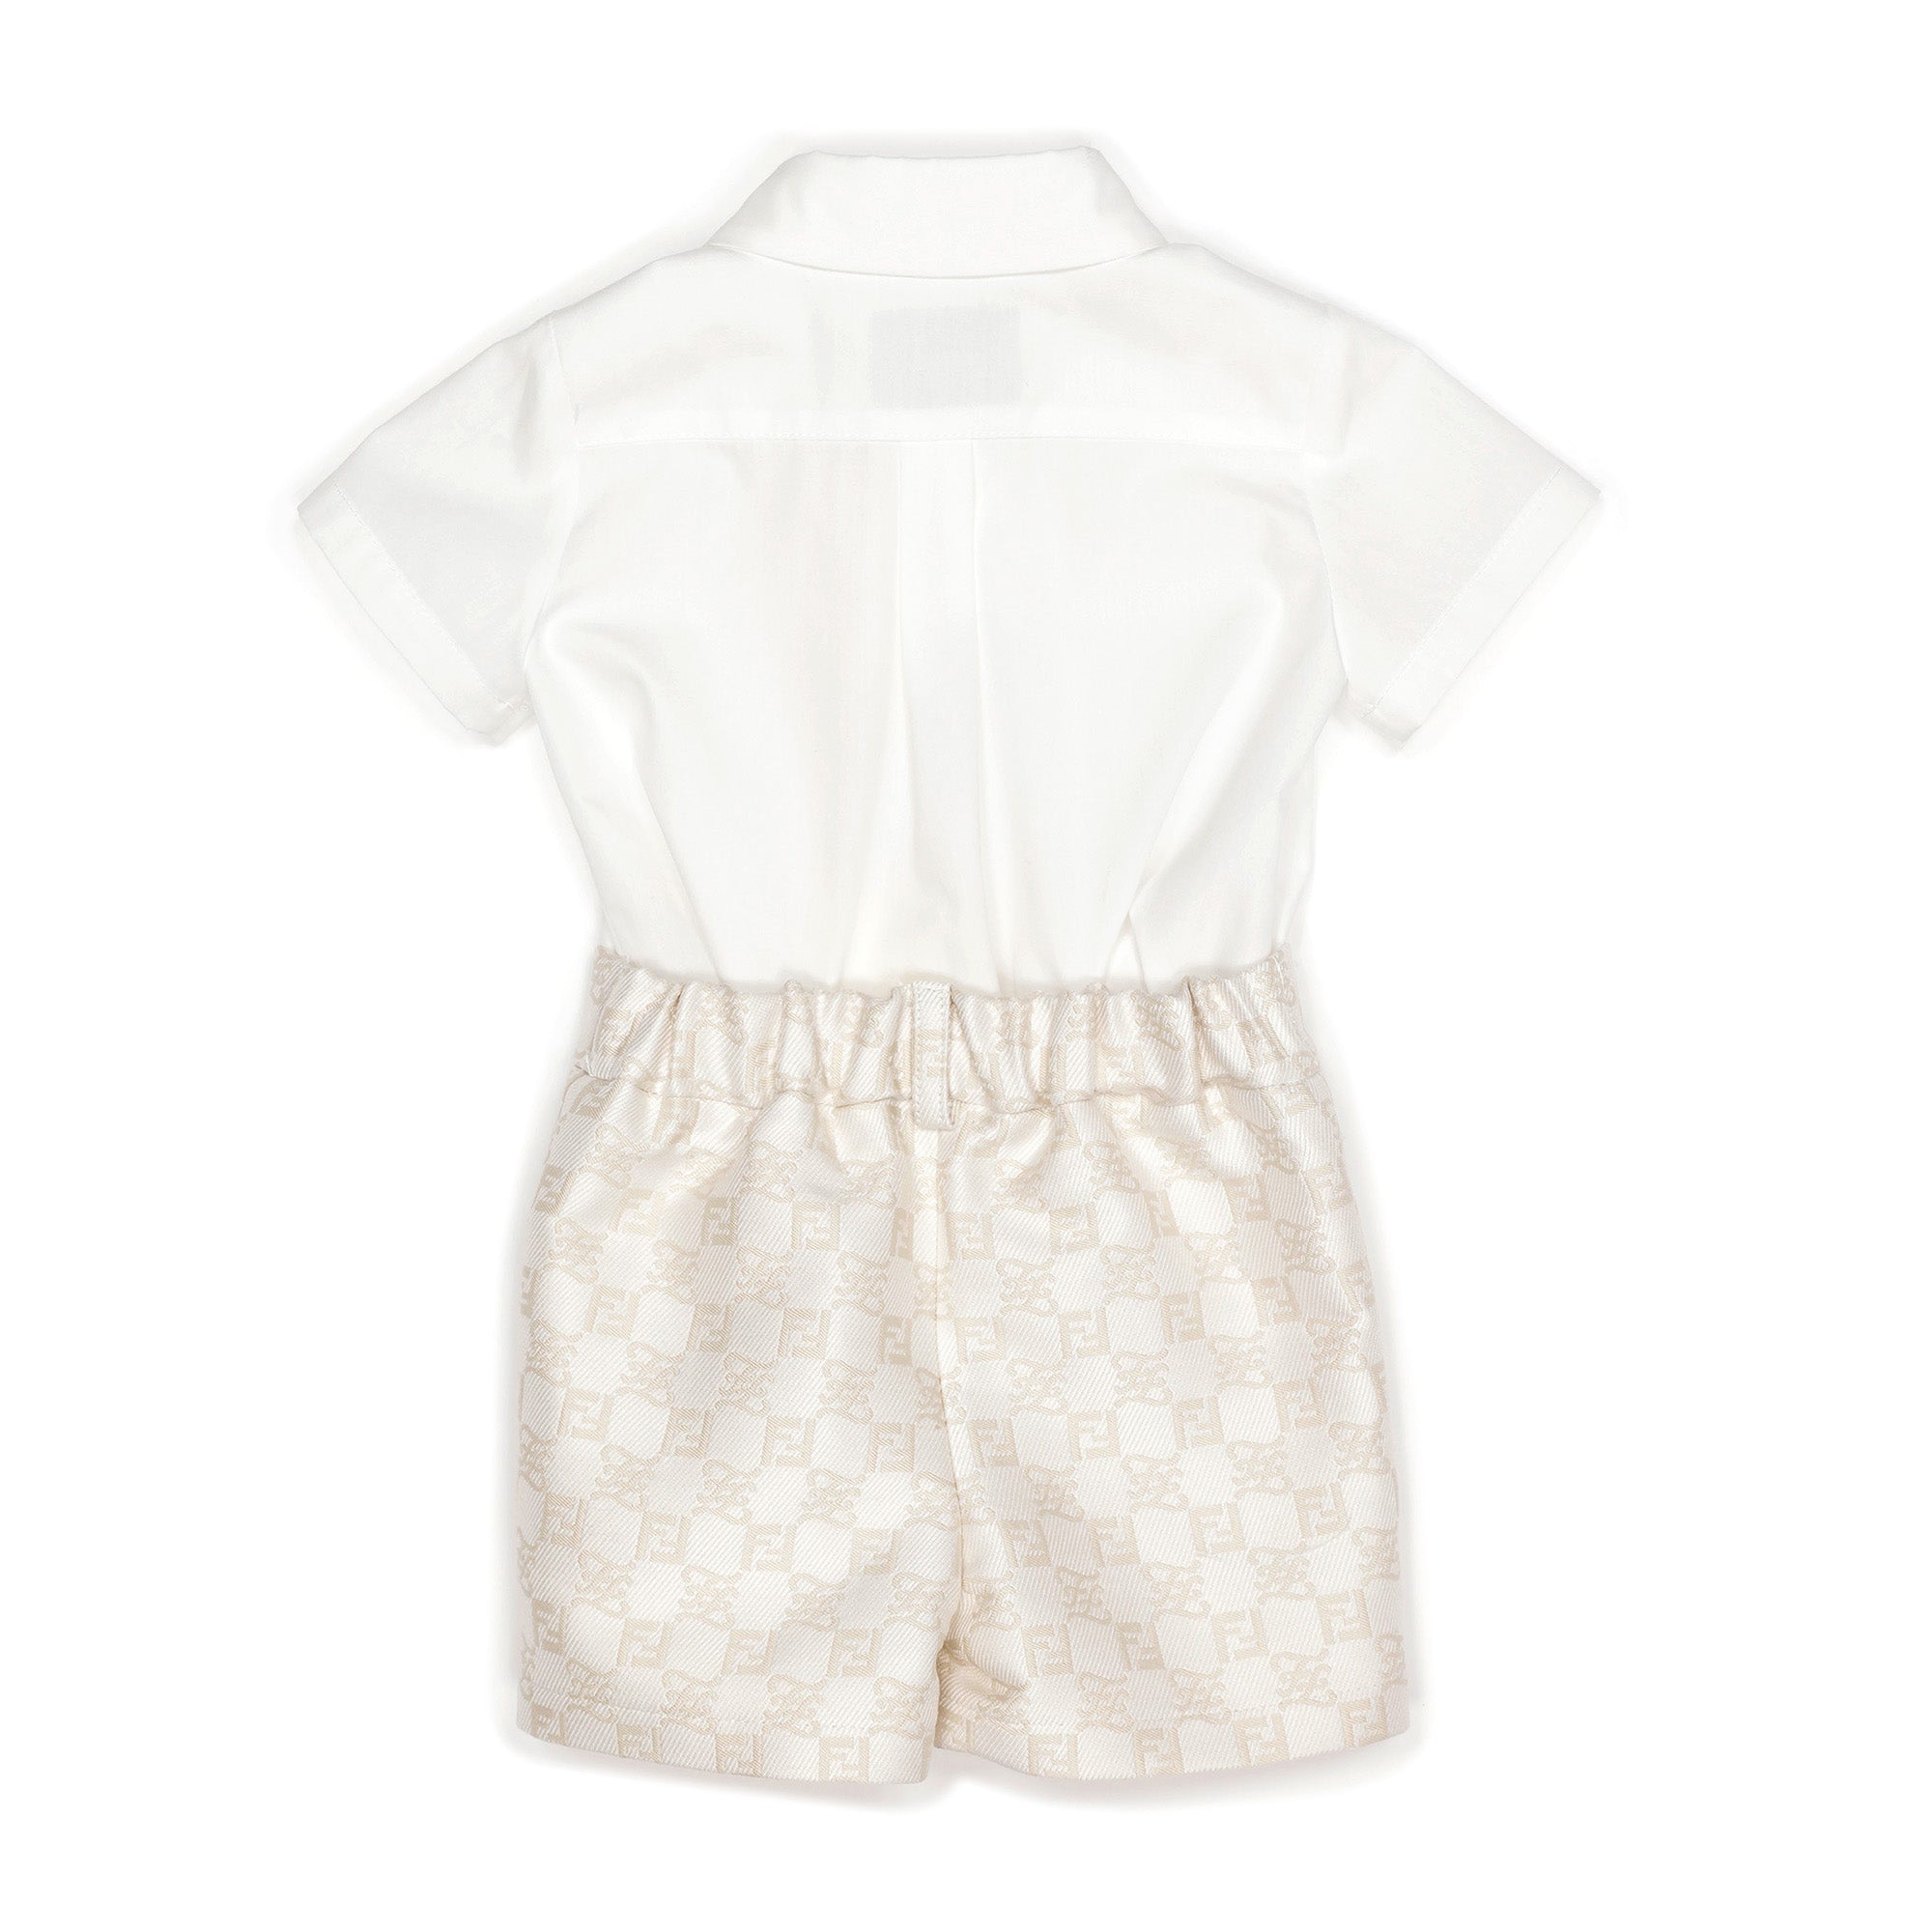 Fendi Baby Boys Champagne Outfit